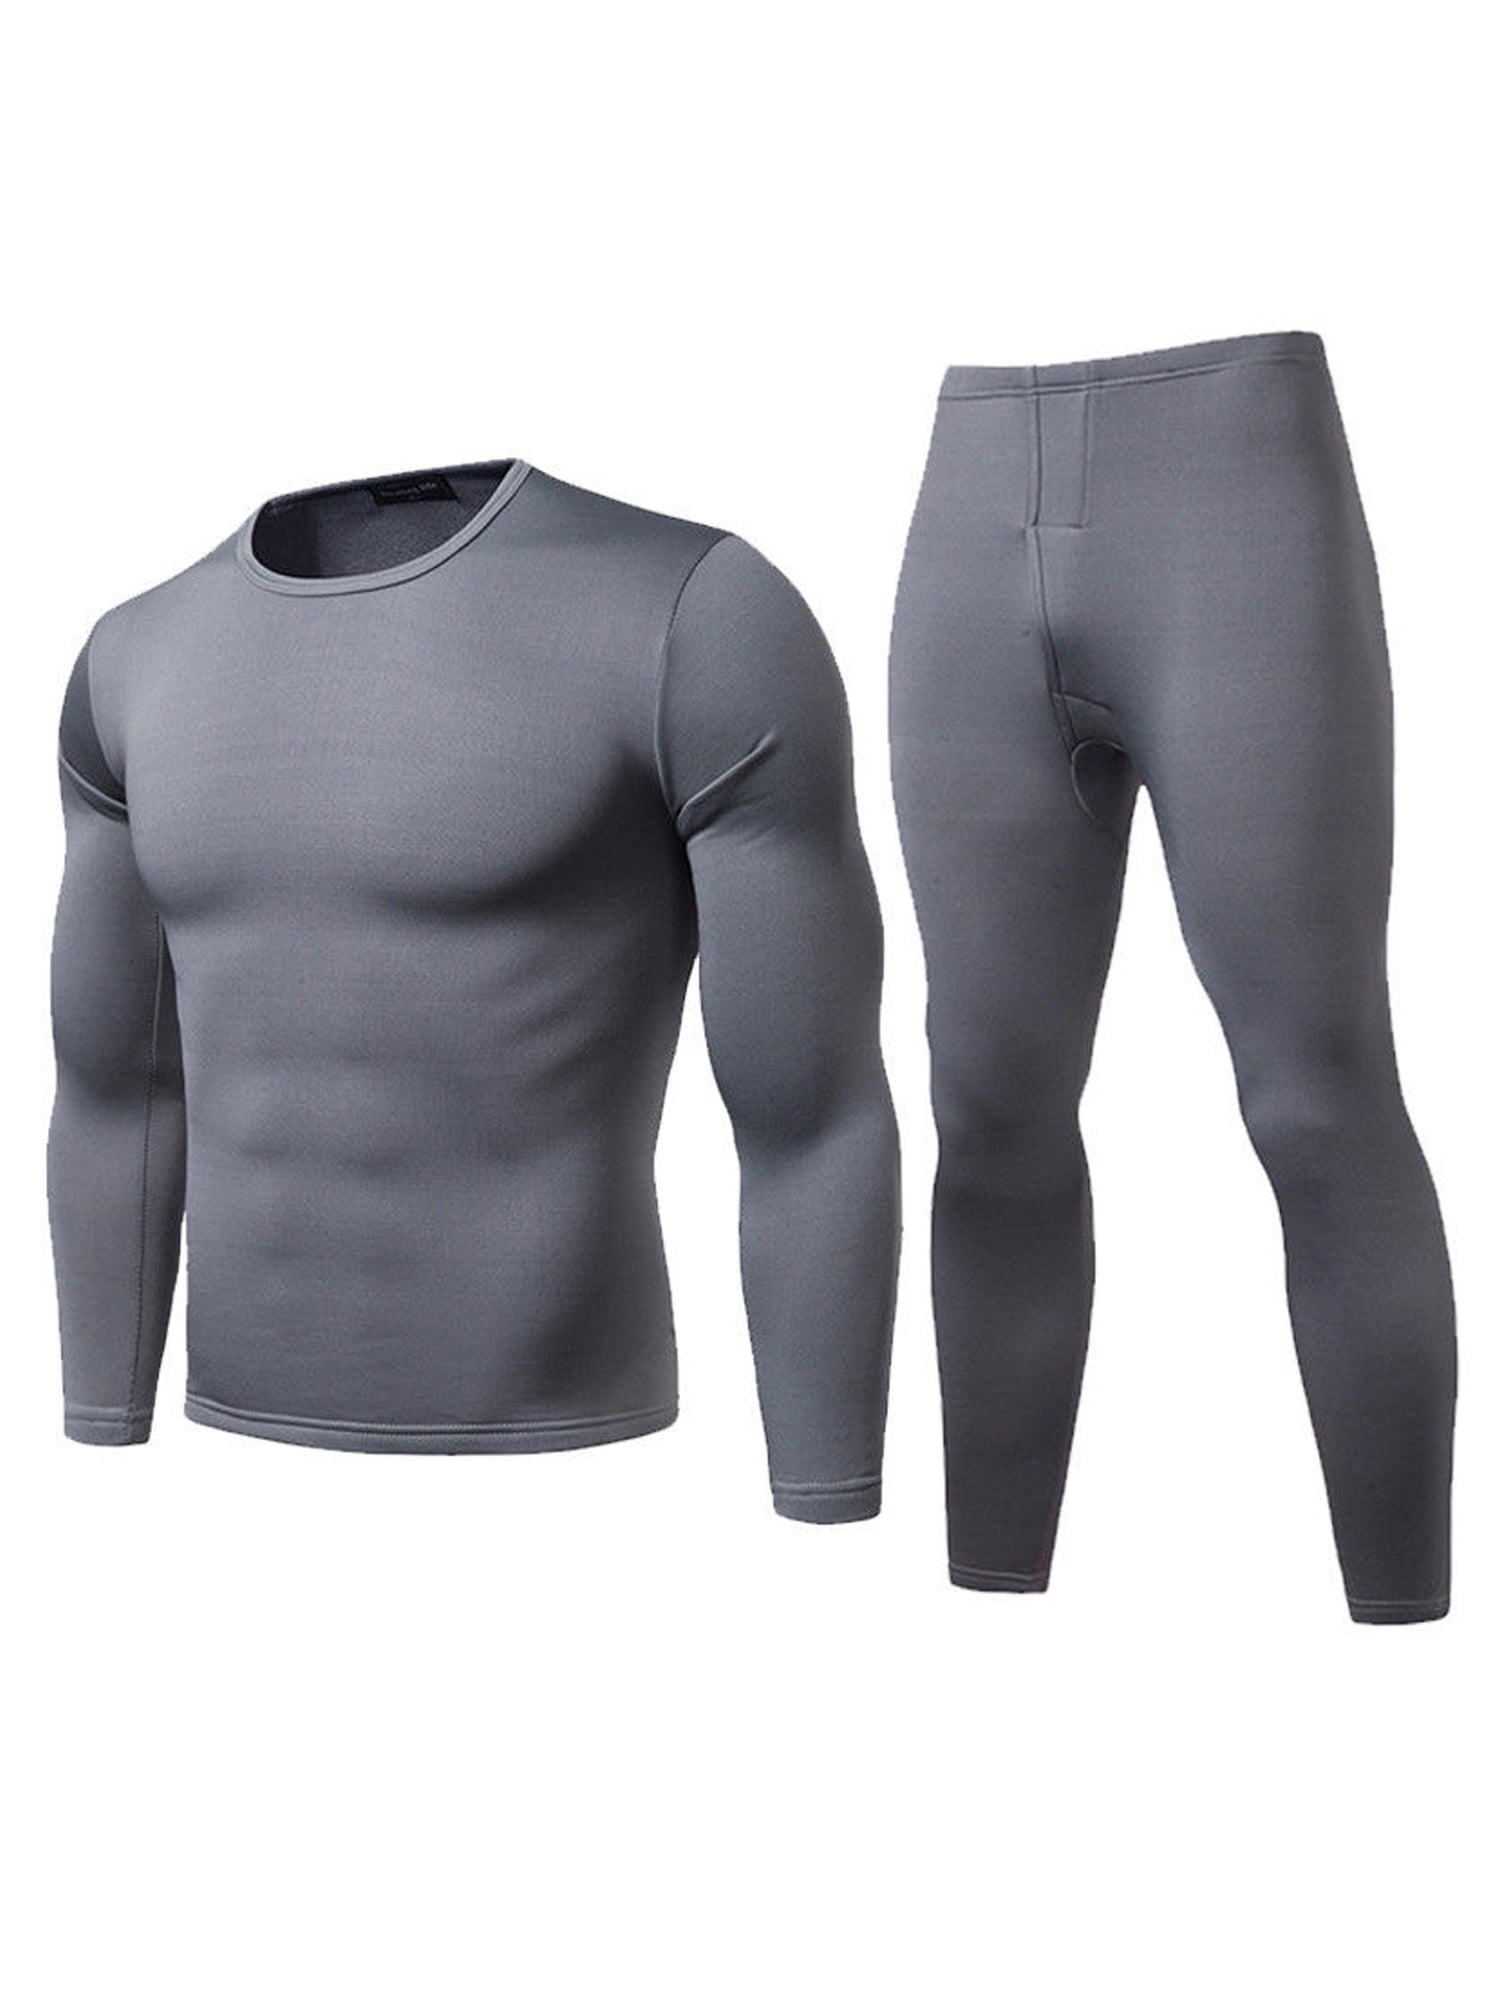 Mens Thermal Base Layer Long Sleeve Compression Top Leggings Tights Underwear Set Wicking Long Johns 